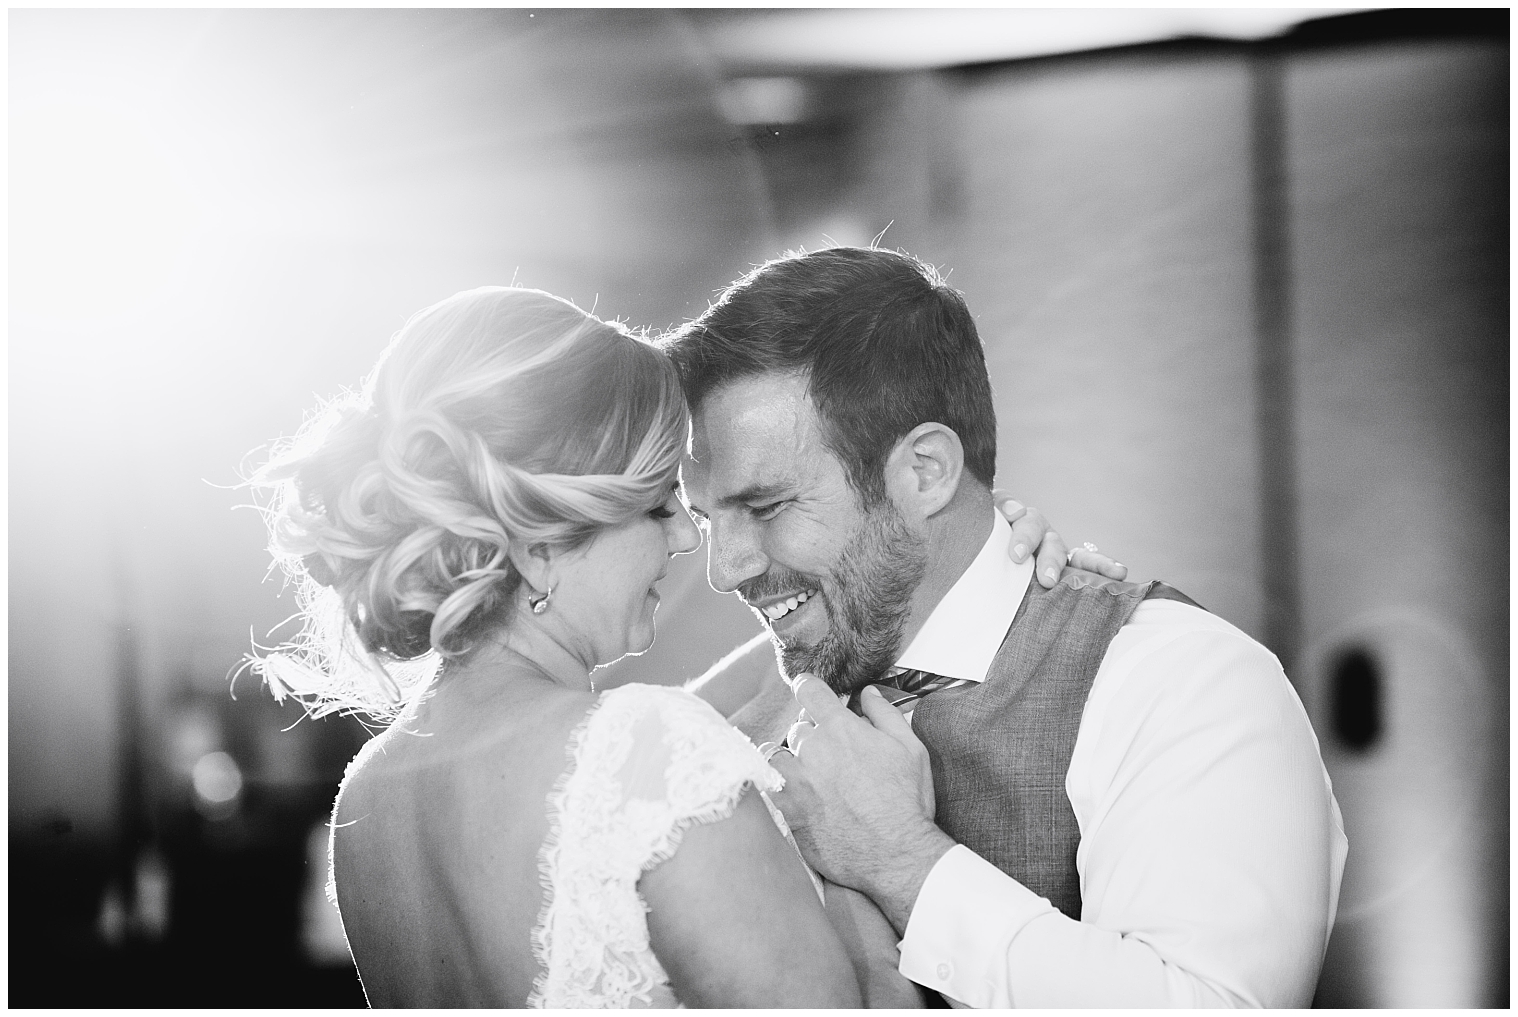 Groom laughs during his first dance with his bride at a Mountain Thunder Lodge wedding.